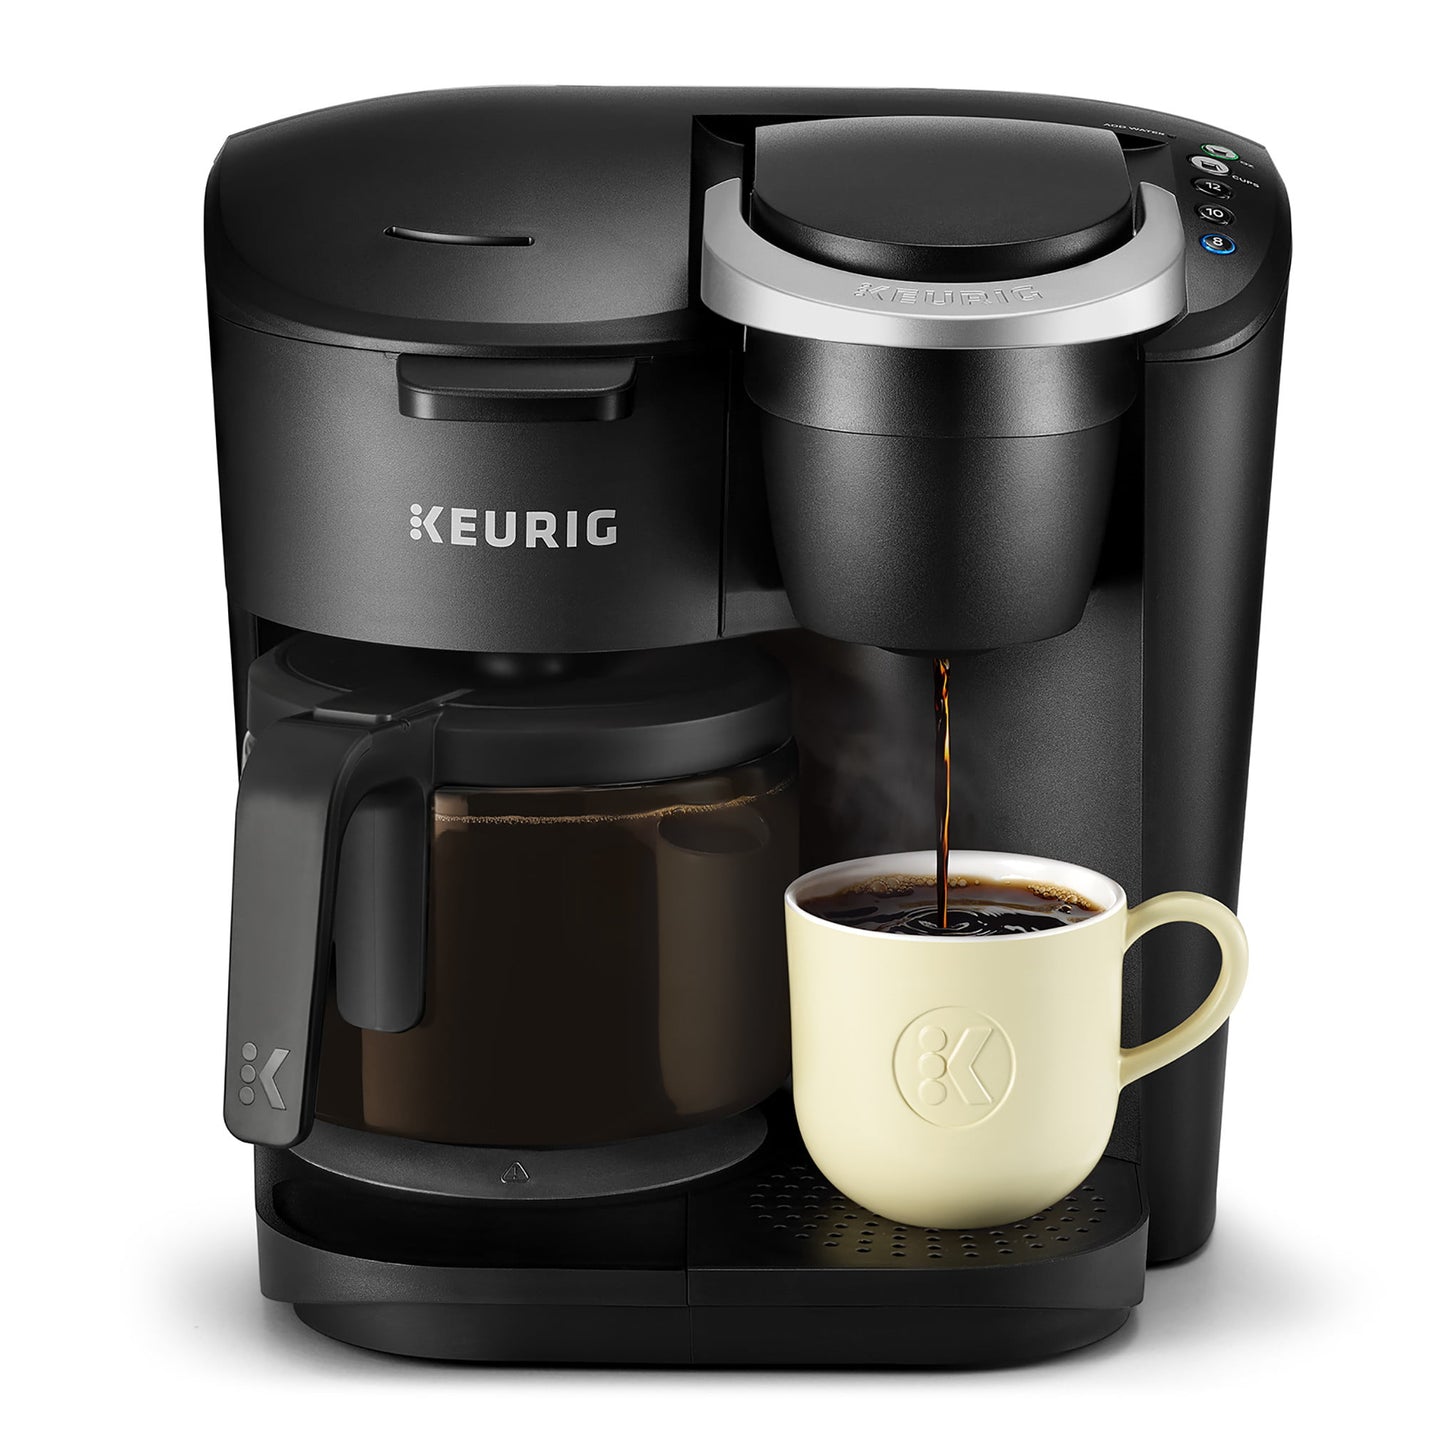 Keurig K-Duo Plus Coffee Maker Review and Demonstration 